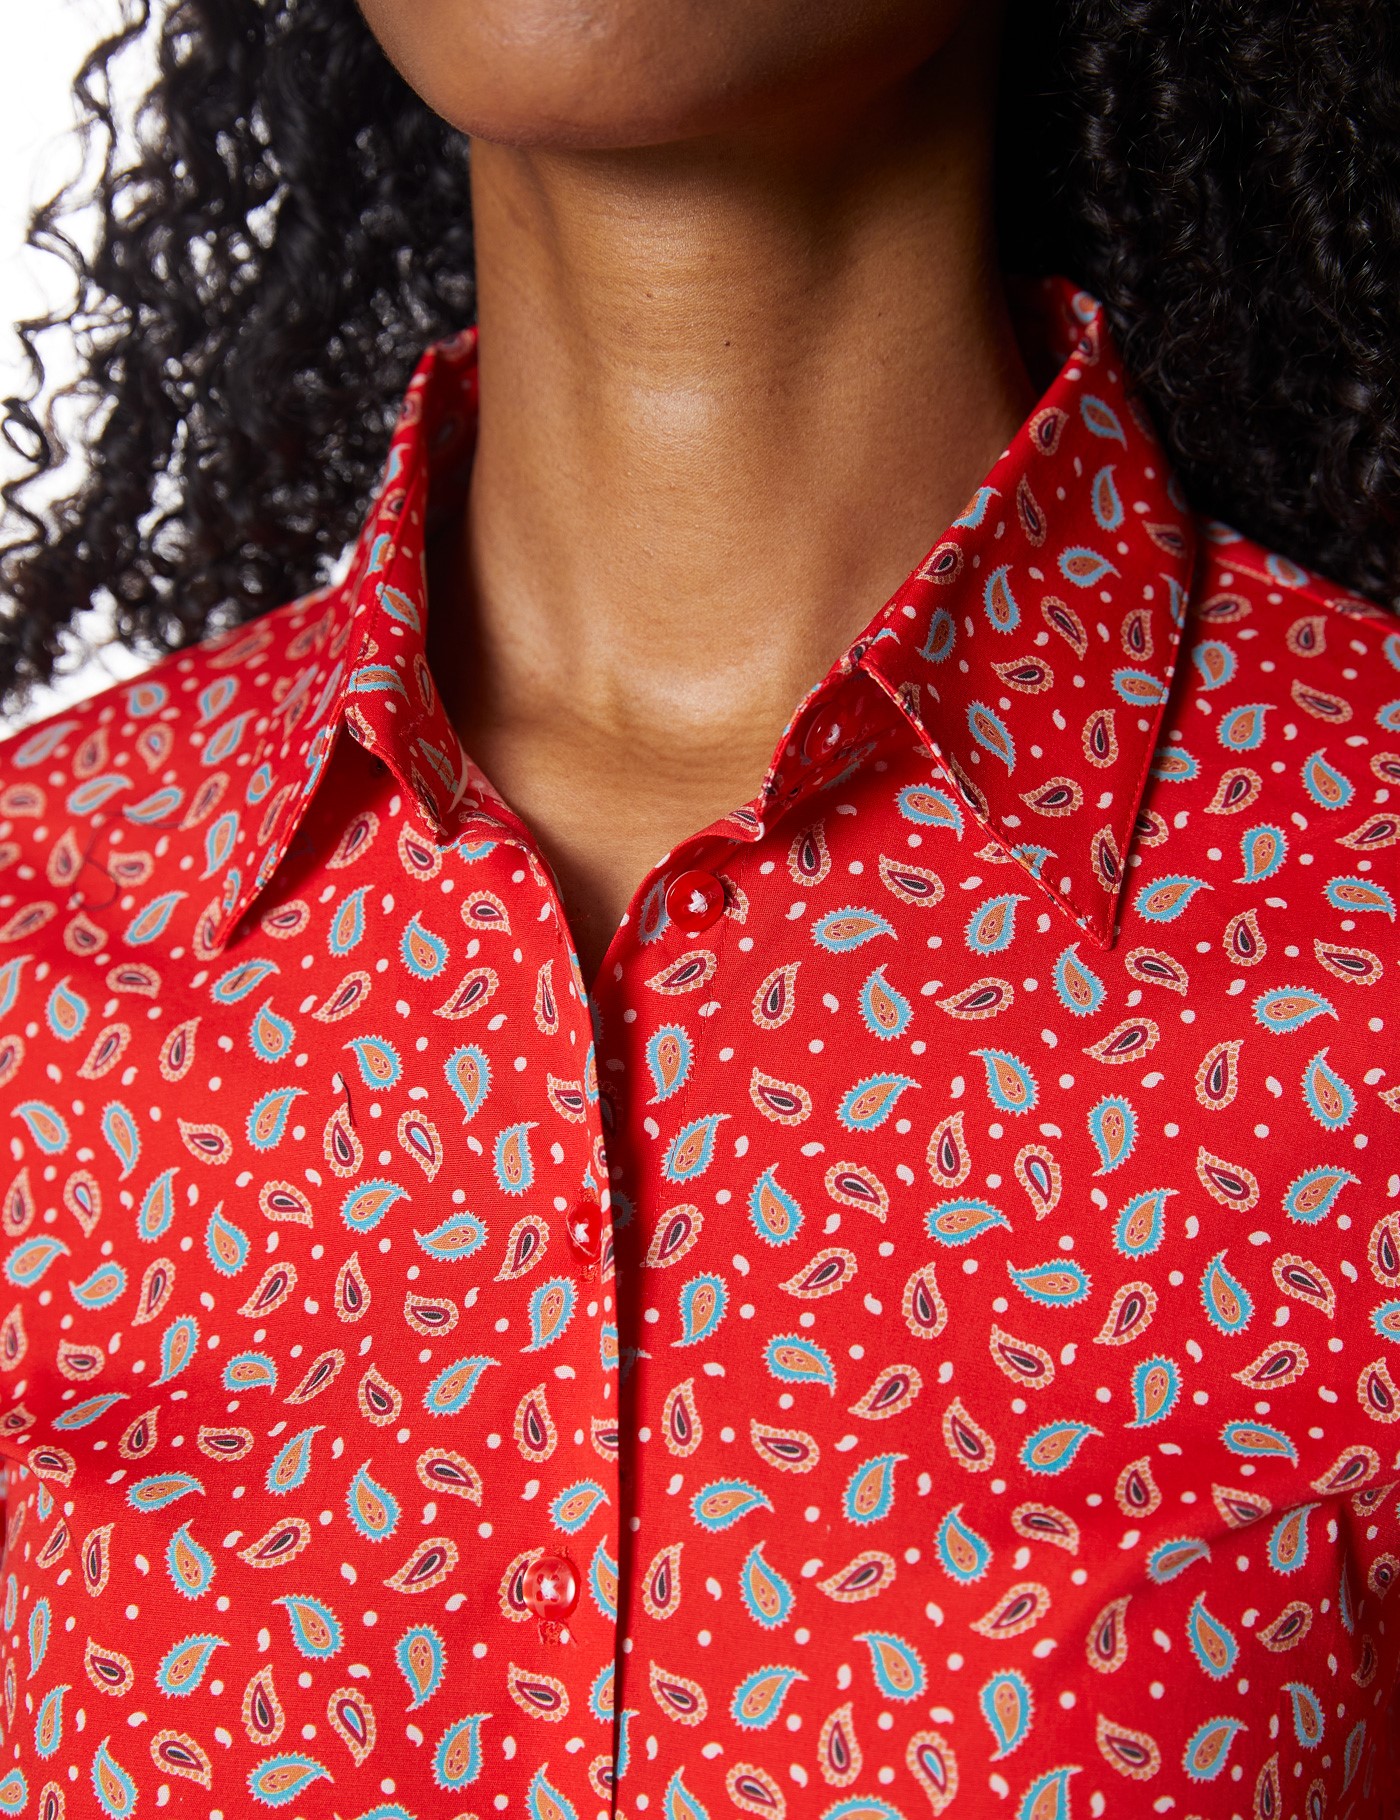 Cotton Stretch Women's Fitted Shirt With Paisley Leaves Design in Red ...